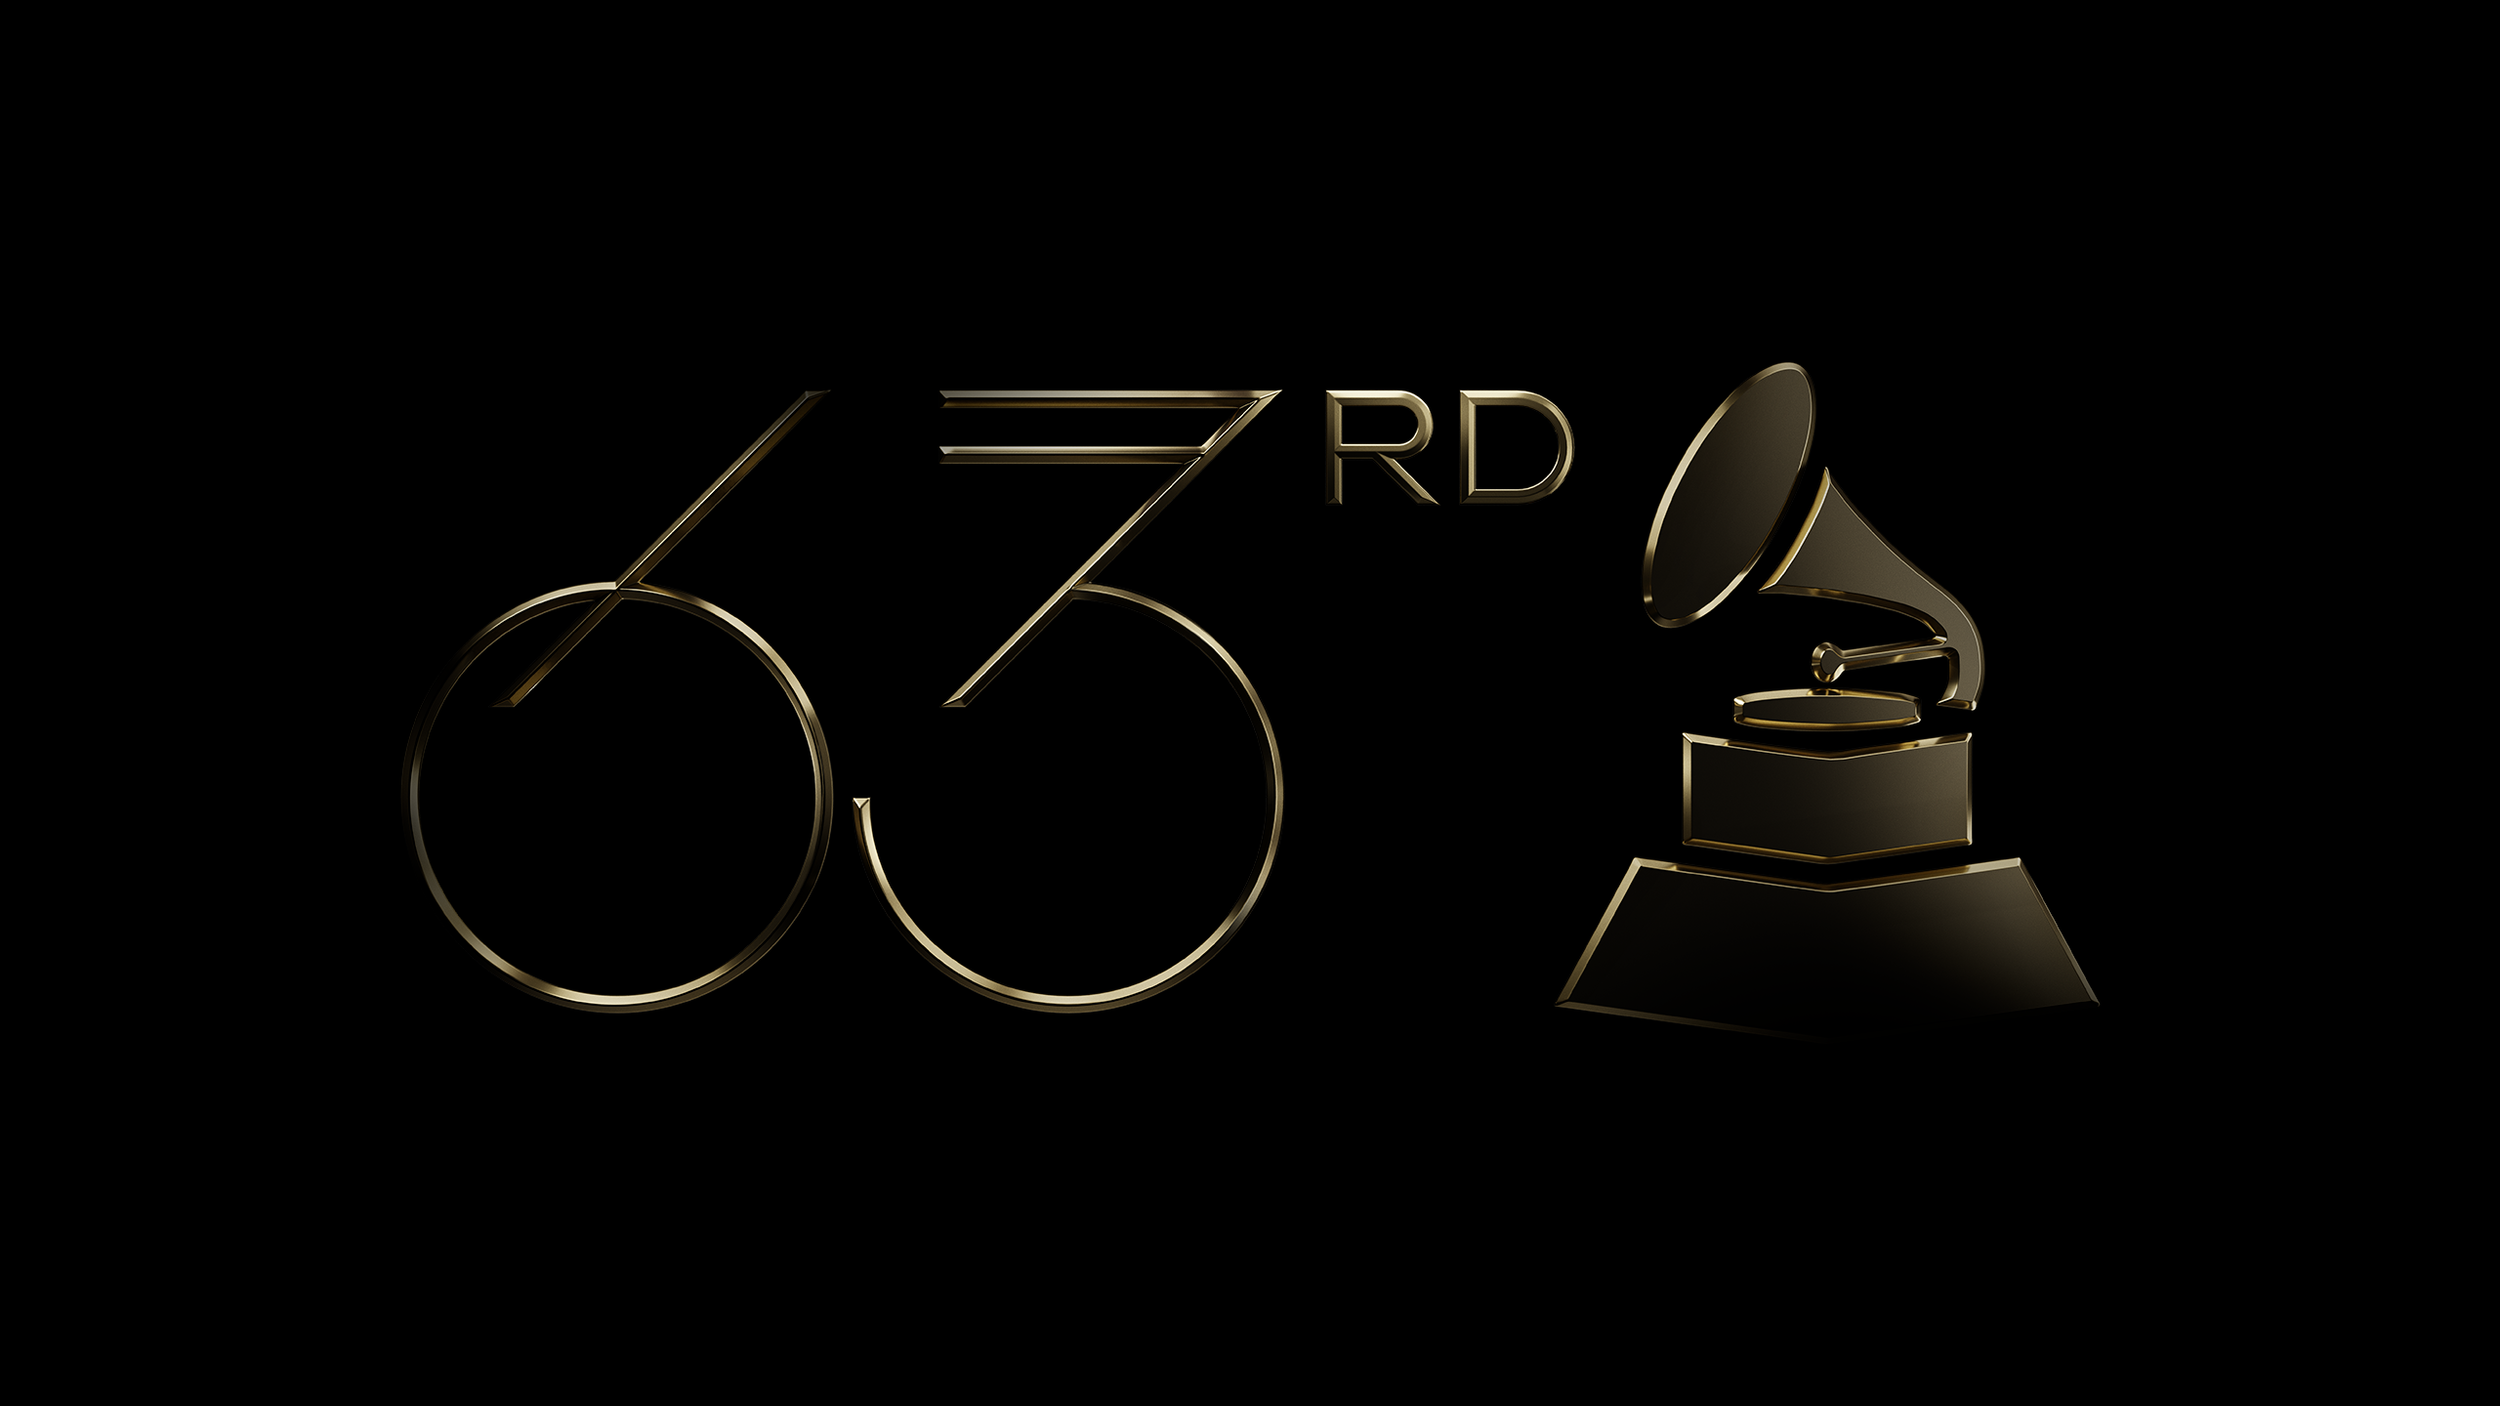 Grammy Awards in partnership with TBWA&#92Chiat&#92Day LA